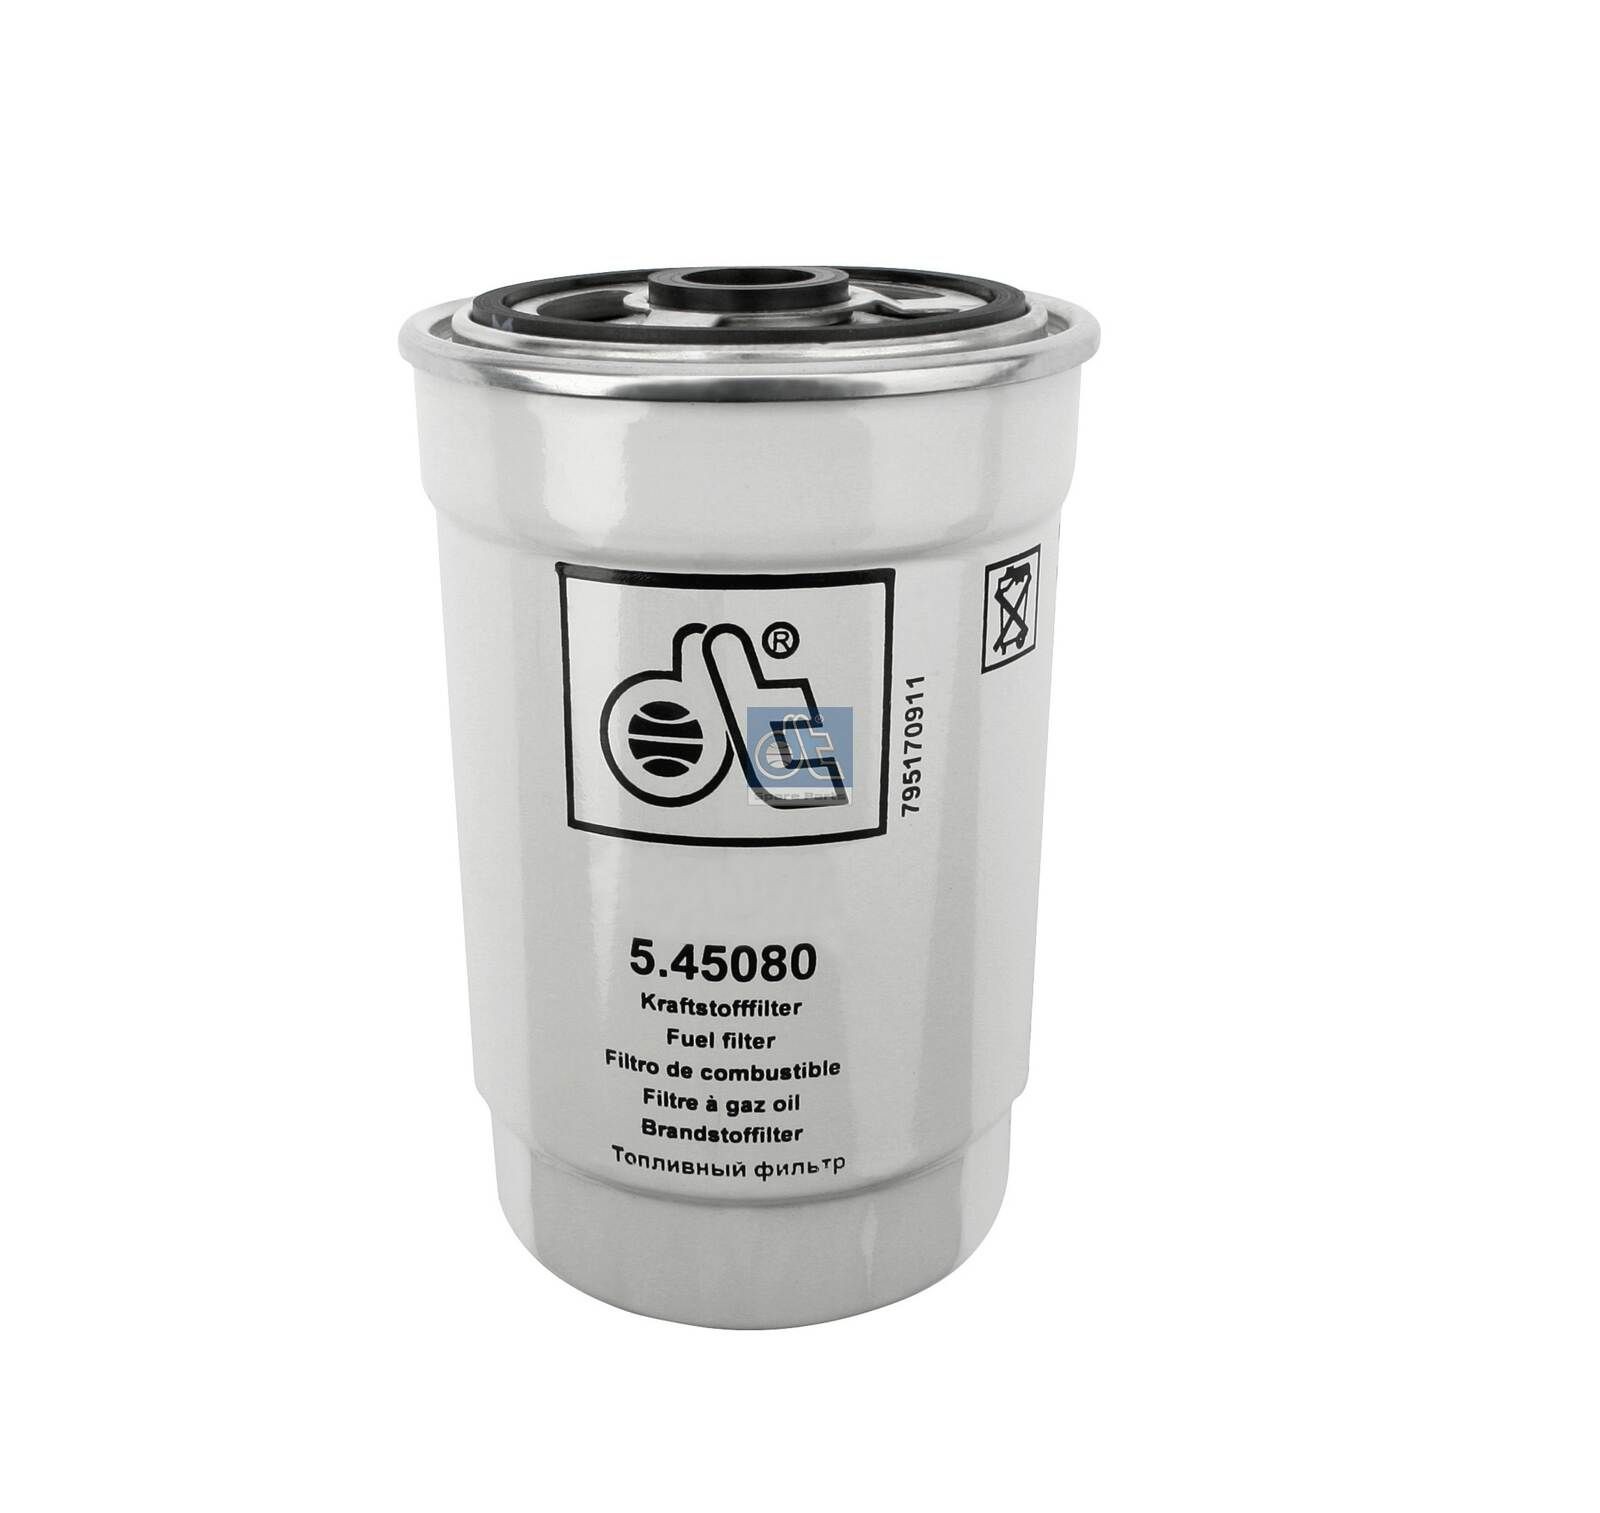 WK 842/6 DT Spare Parts 5.45080 Fuel filter 00 0649500.1